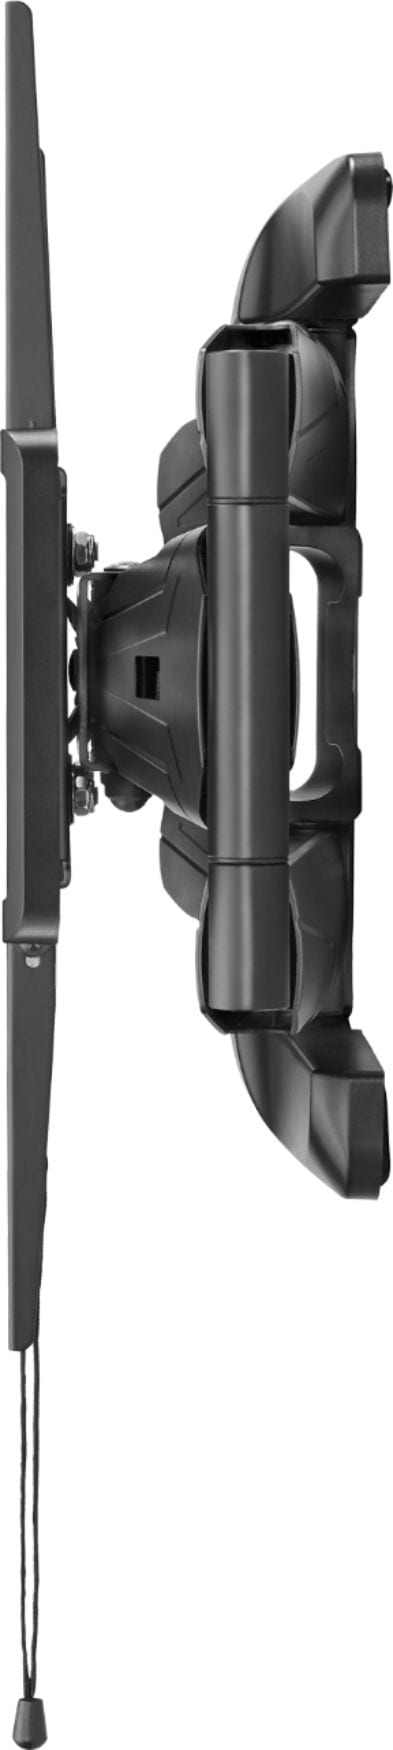 Insignia™ - Full-Motion Wall Mount for 47" - 90" TVs up to 130 lbs. - Extends 25.2” - Black_5